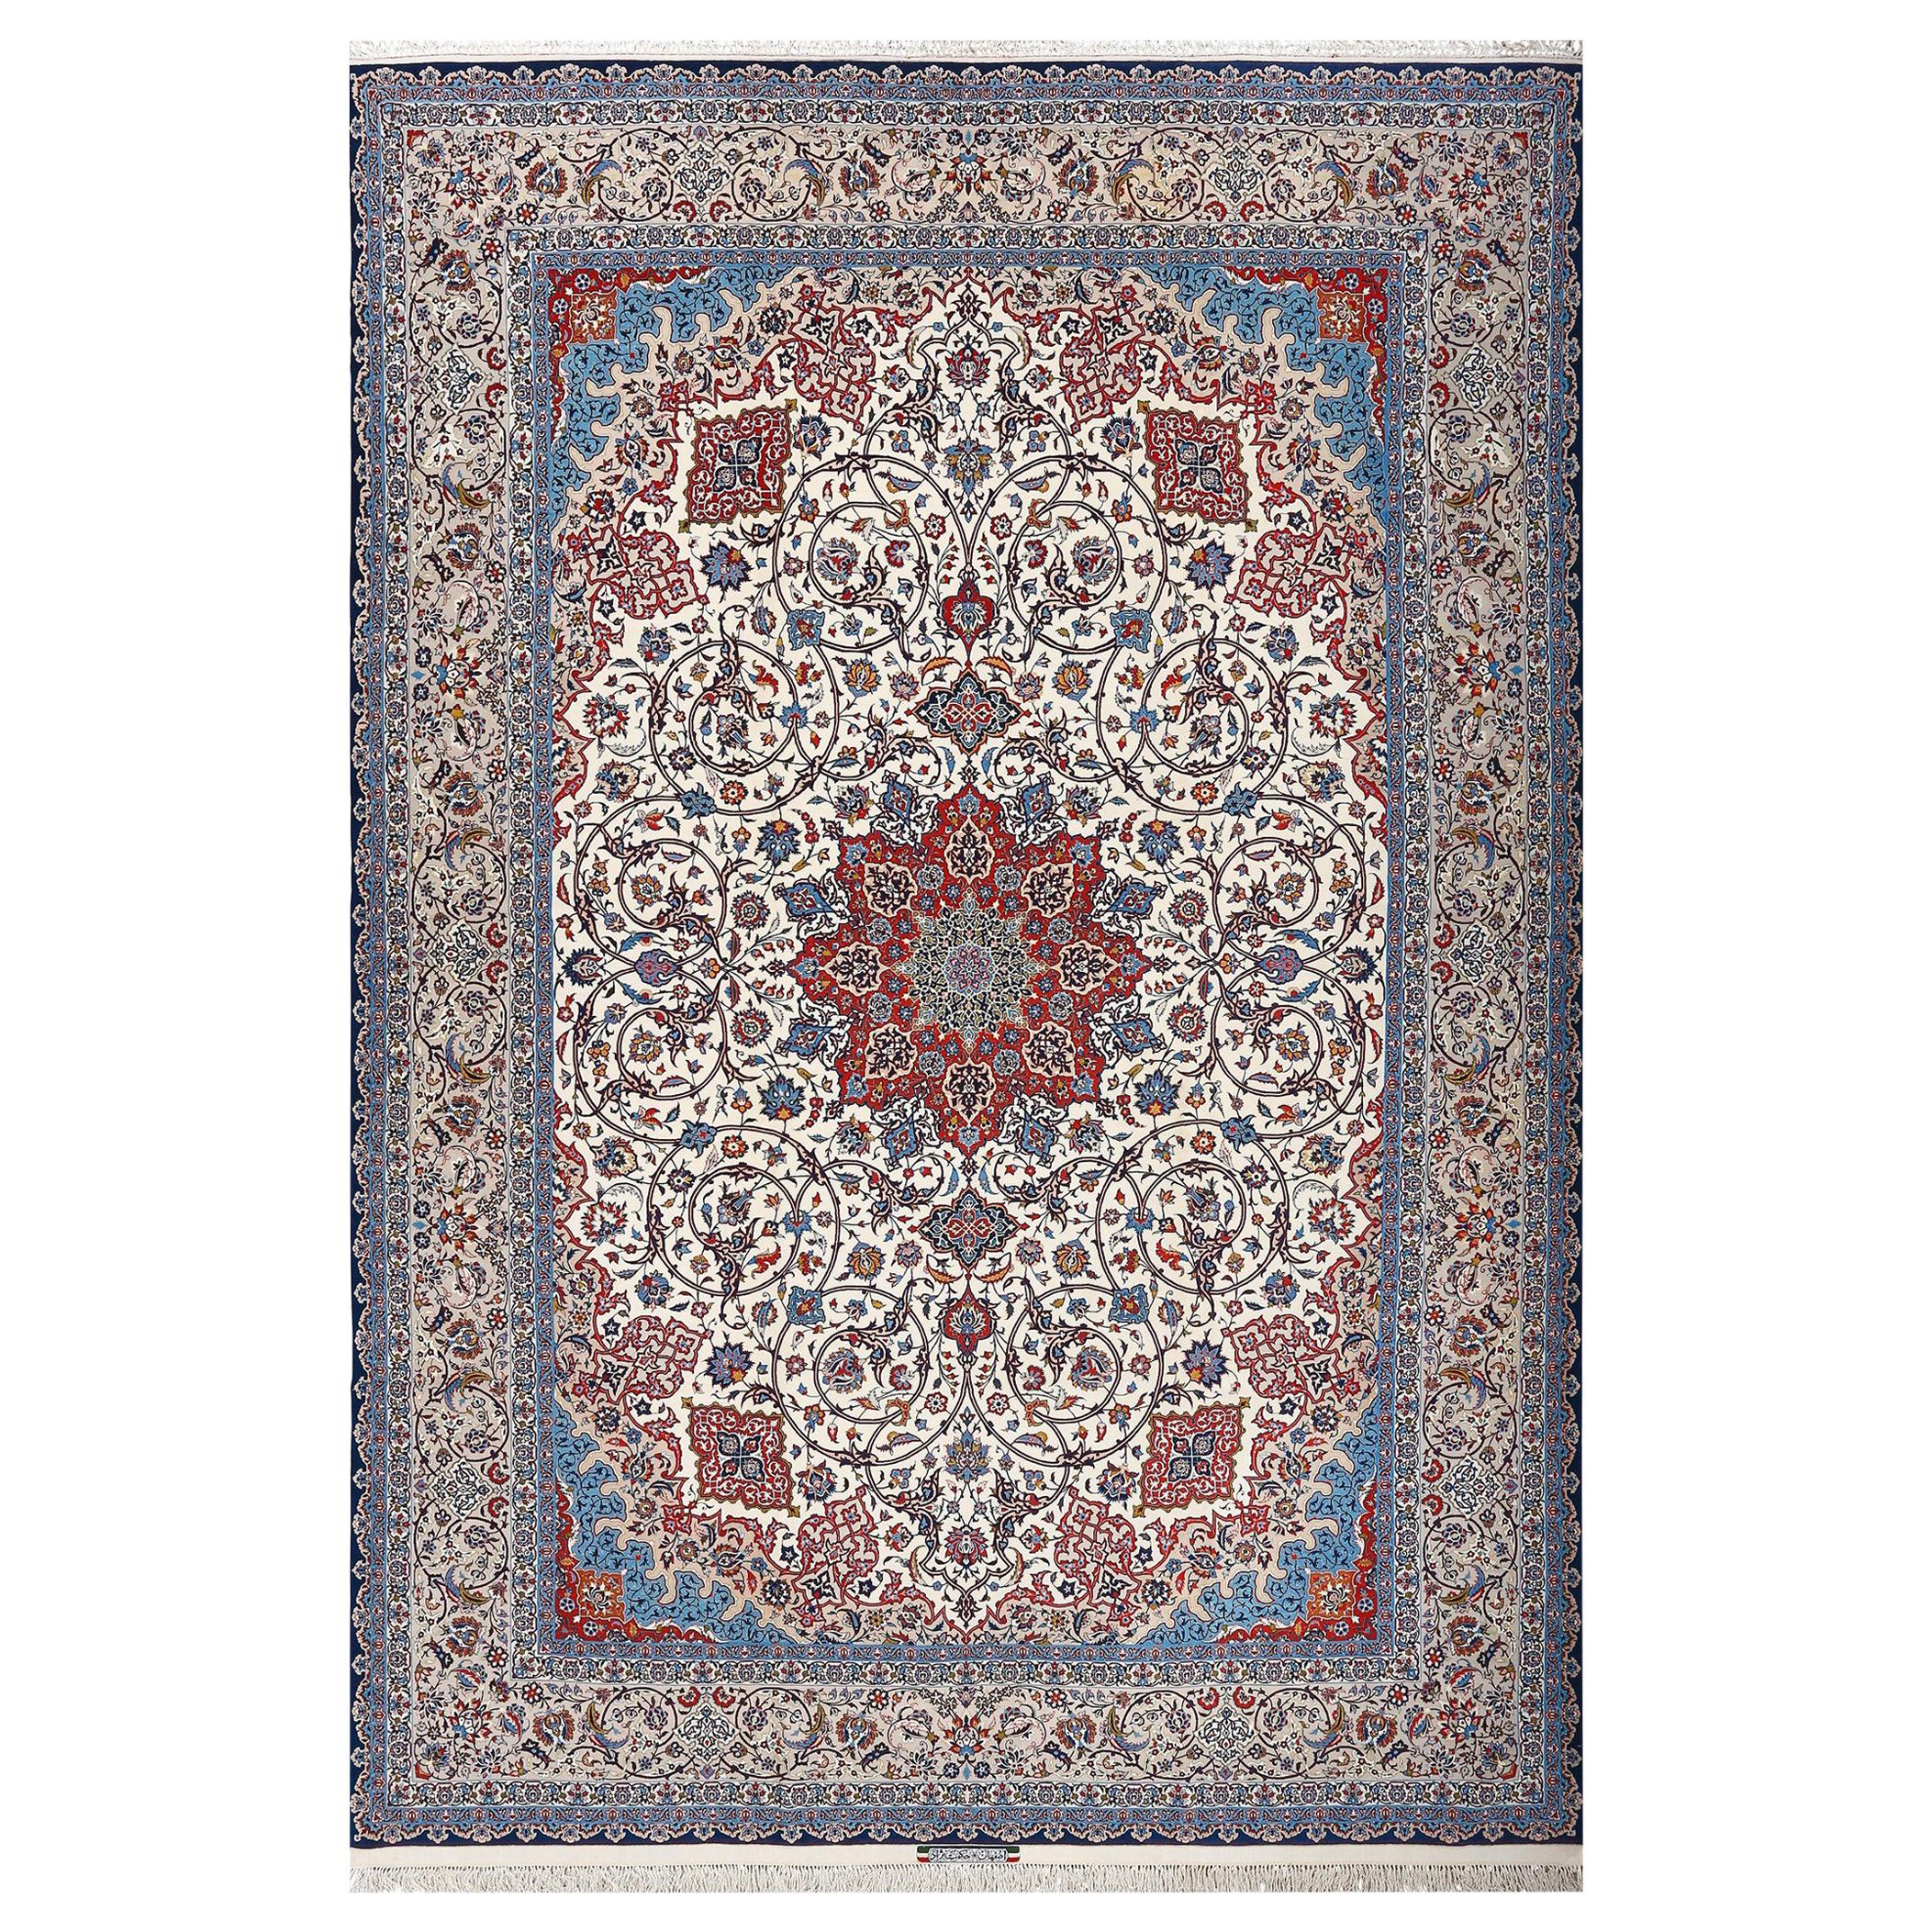 Fine Vintage Isfahan Persian Rug. Size: 10 ft 2 in x 14 ft 7 in (3.1 m x 4.44 m)